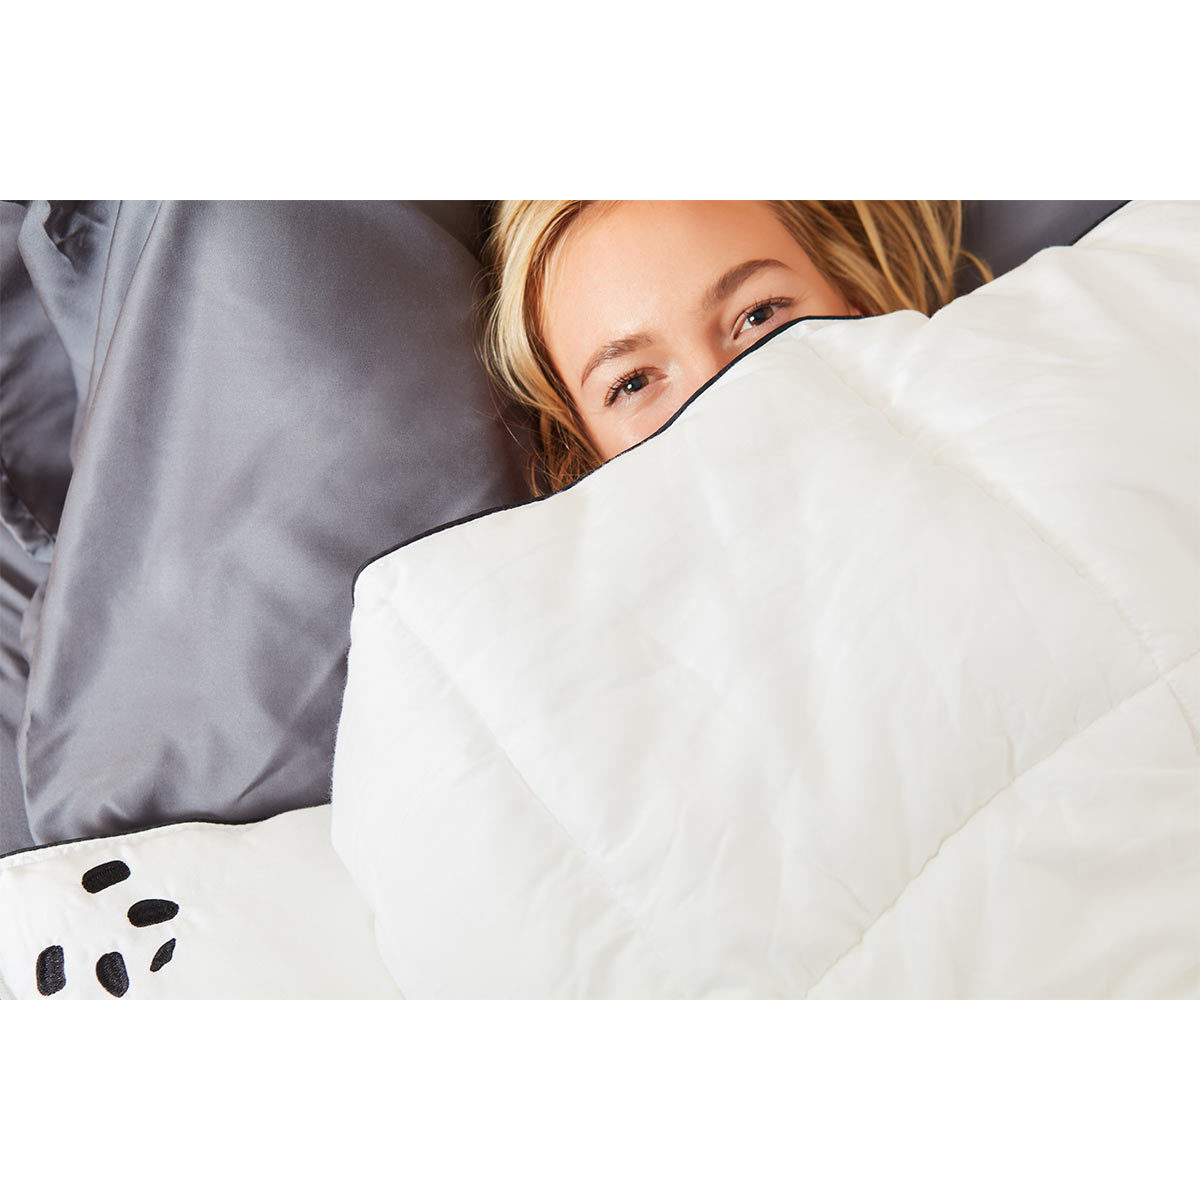 Duvet covering woman only eyes and top of head showing